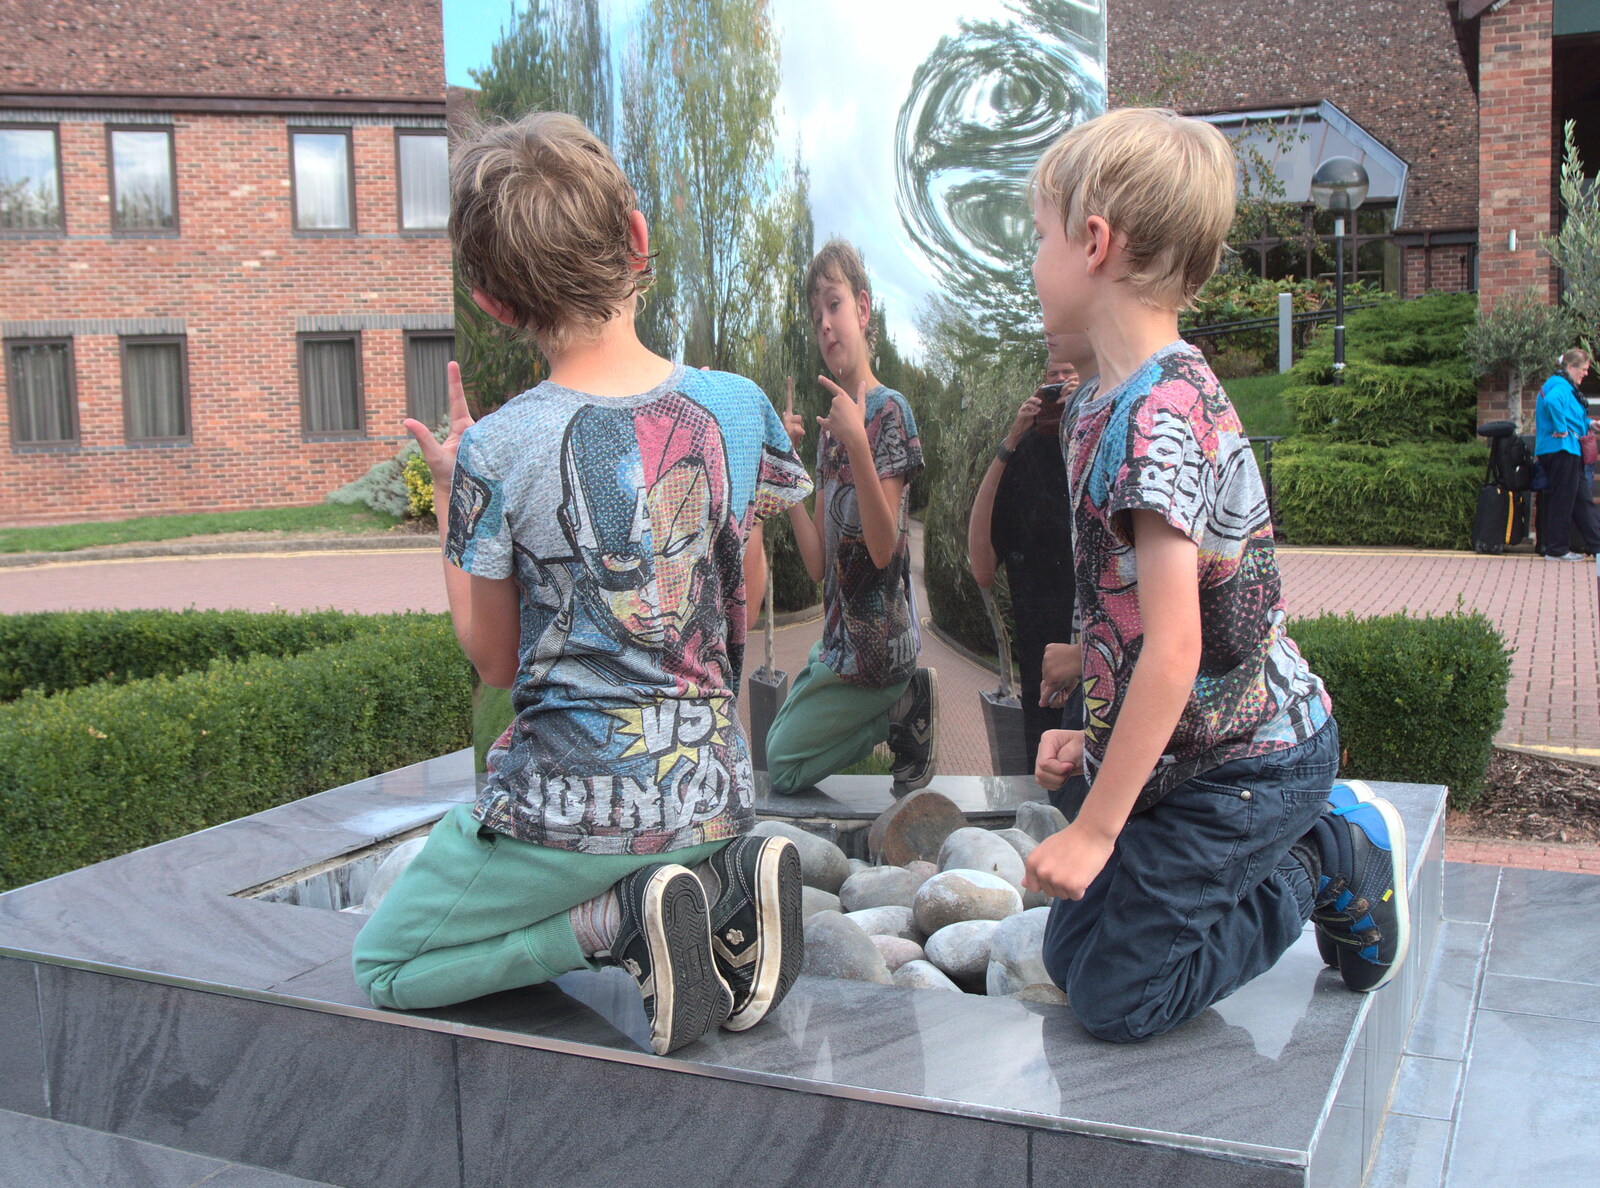 The boys mess around with the mirror-sculpture  from A Postcard from Stratford-upon-Avon, Warwickshire - 9th September 2018